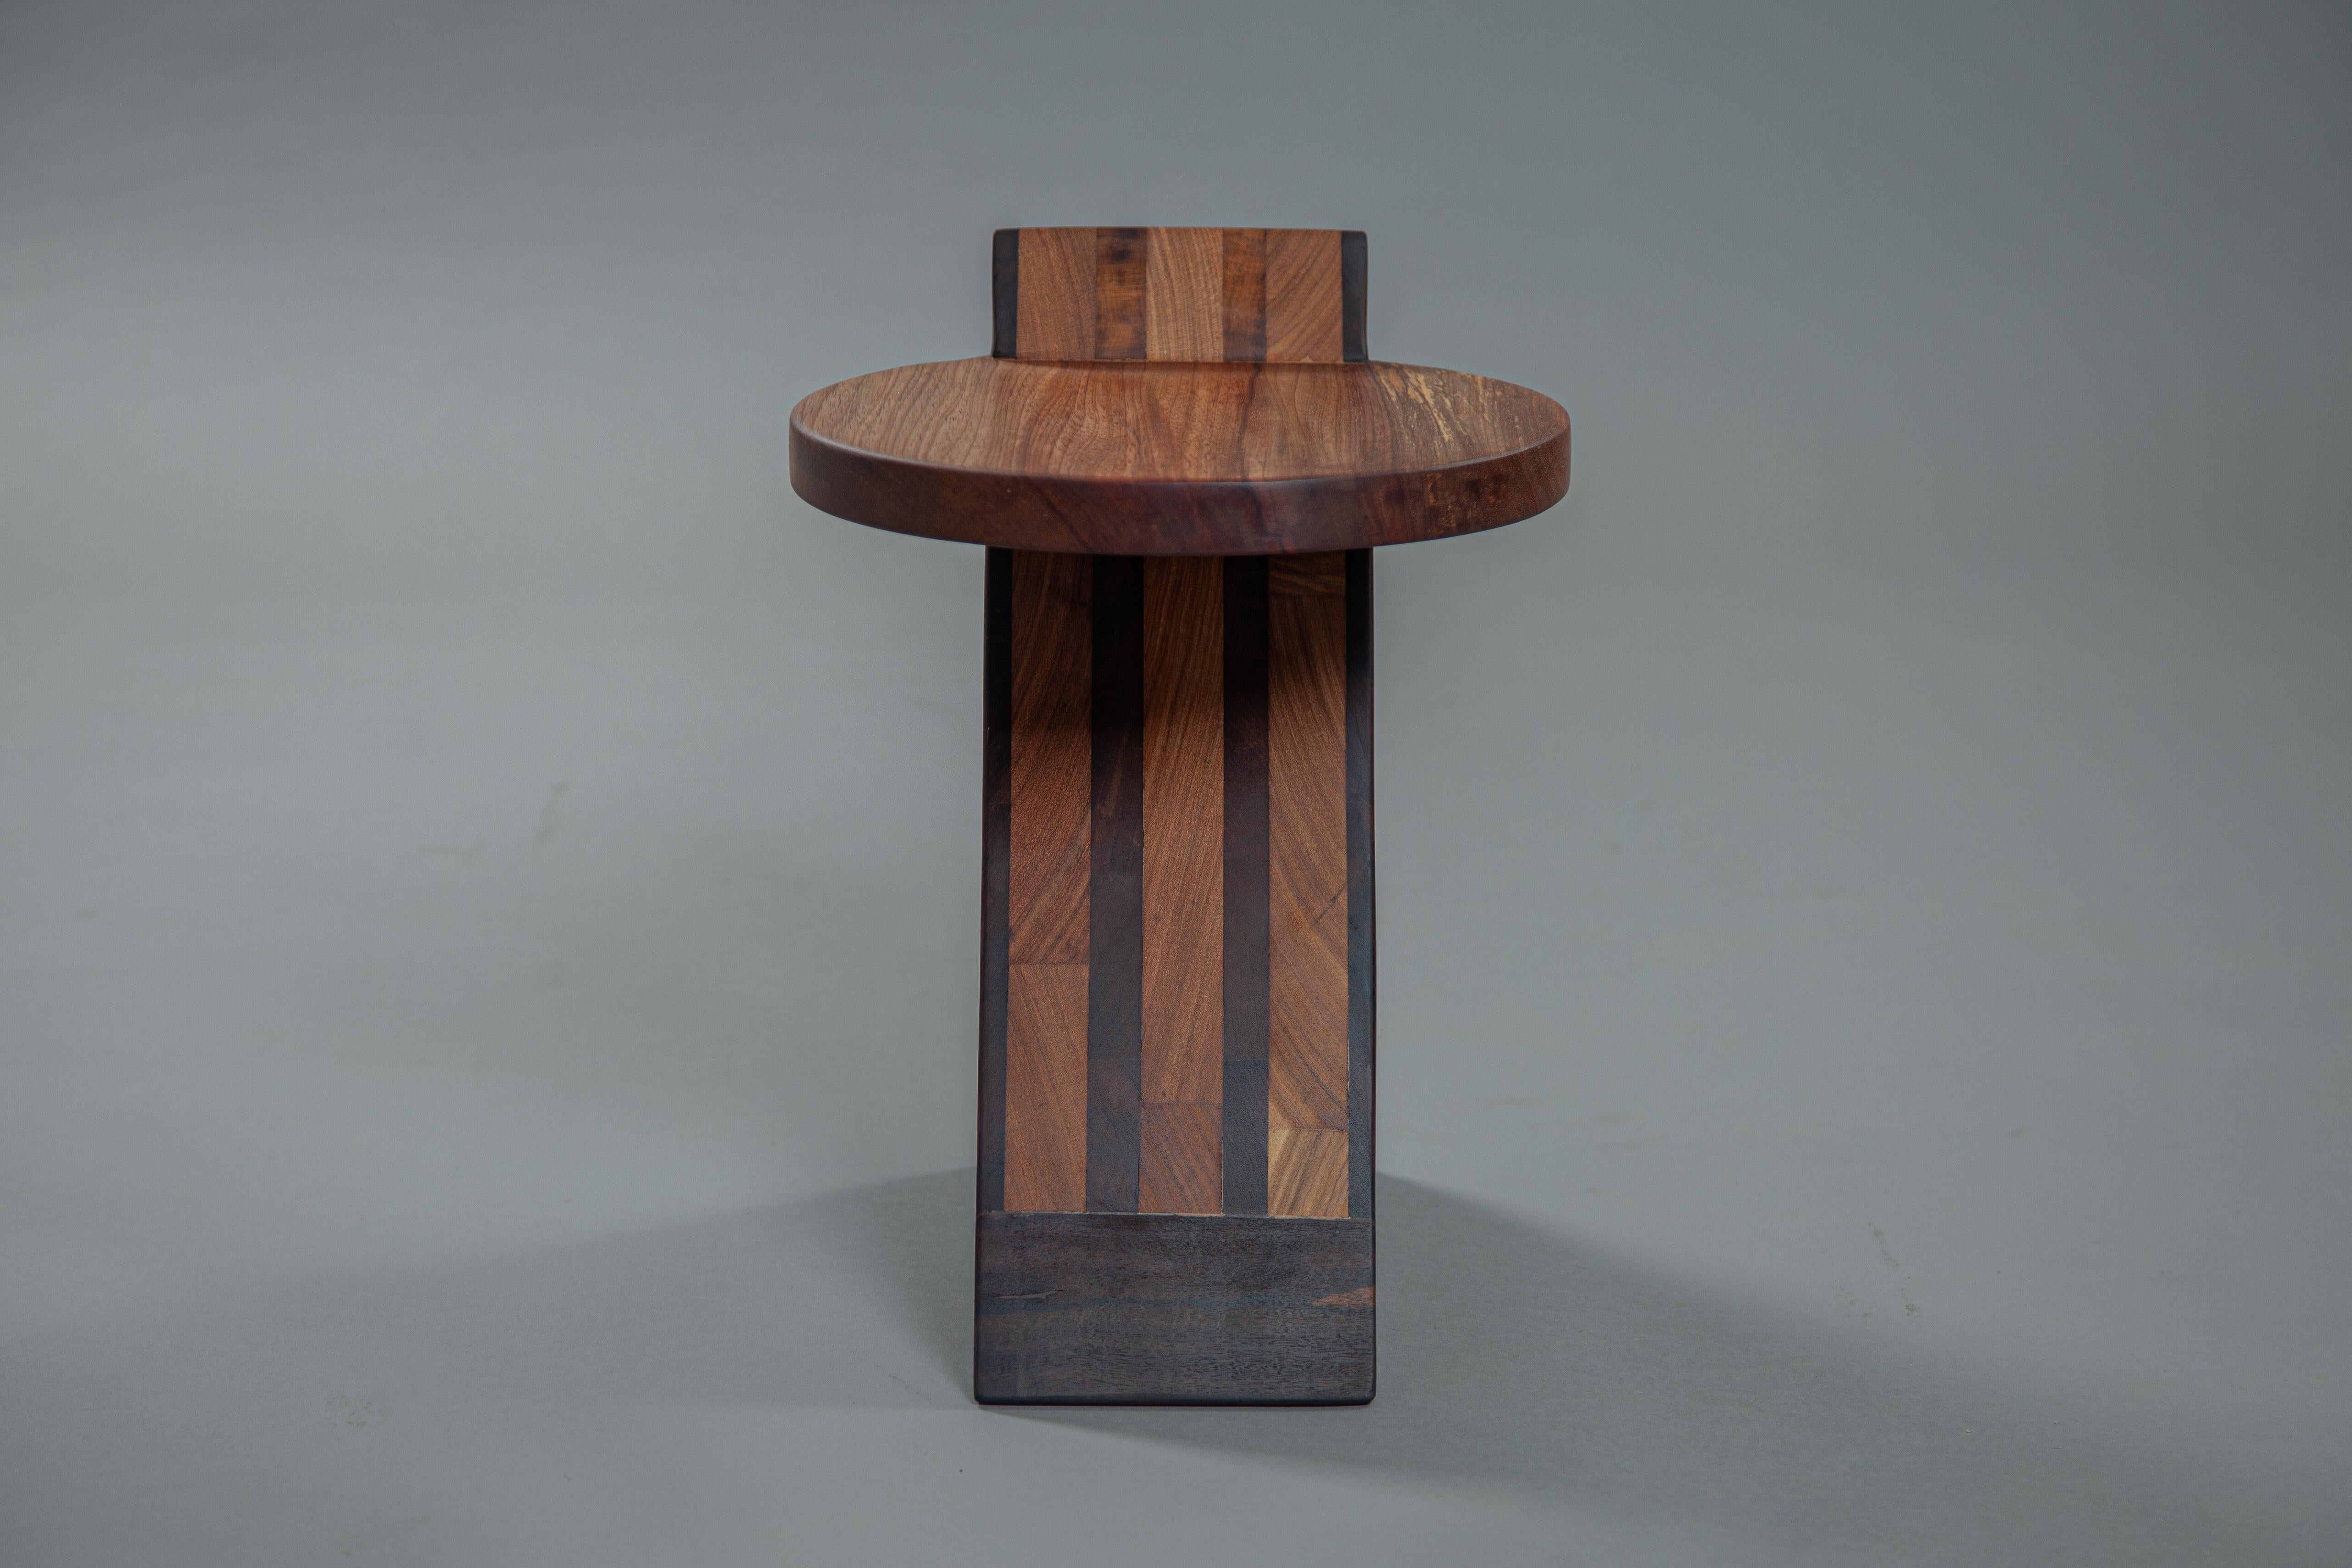 The Inácio stool plays with geometric shapes, aiming to create a sense of movement and fluidity. It is made entirely from leftover solid wood from other projects, which would typically be discarded.90